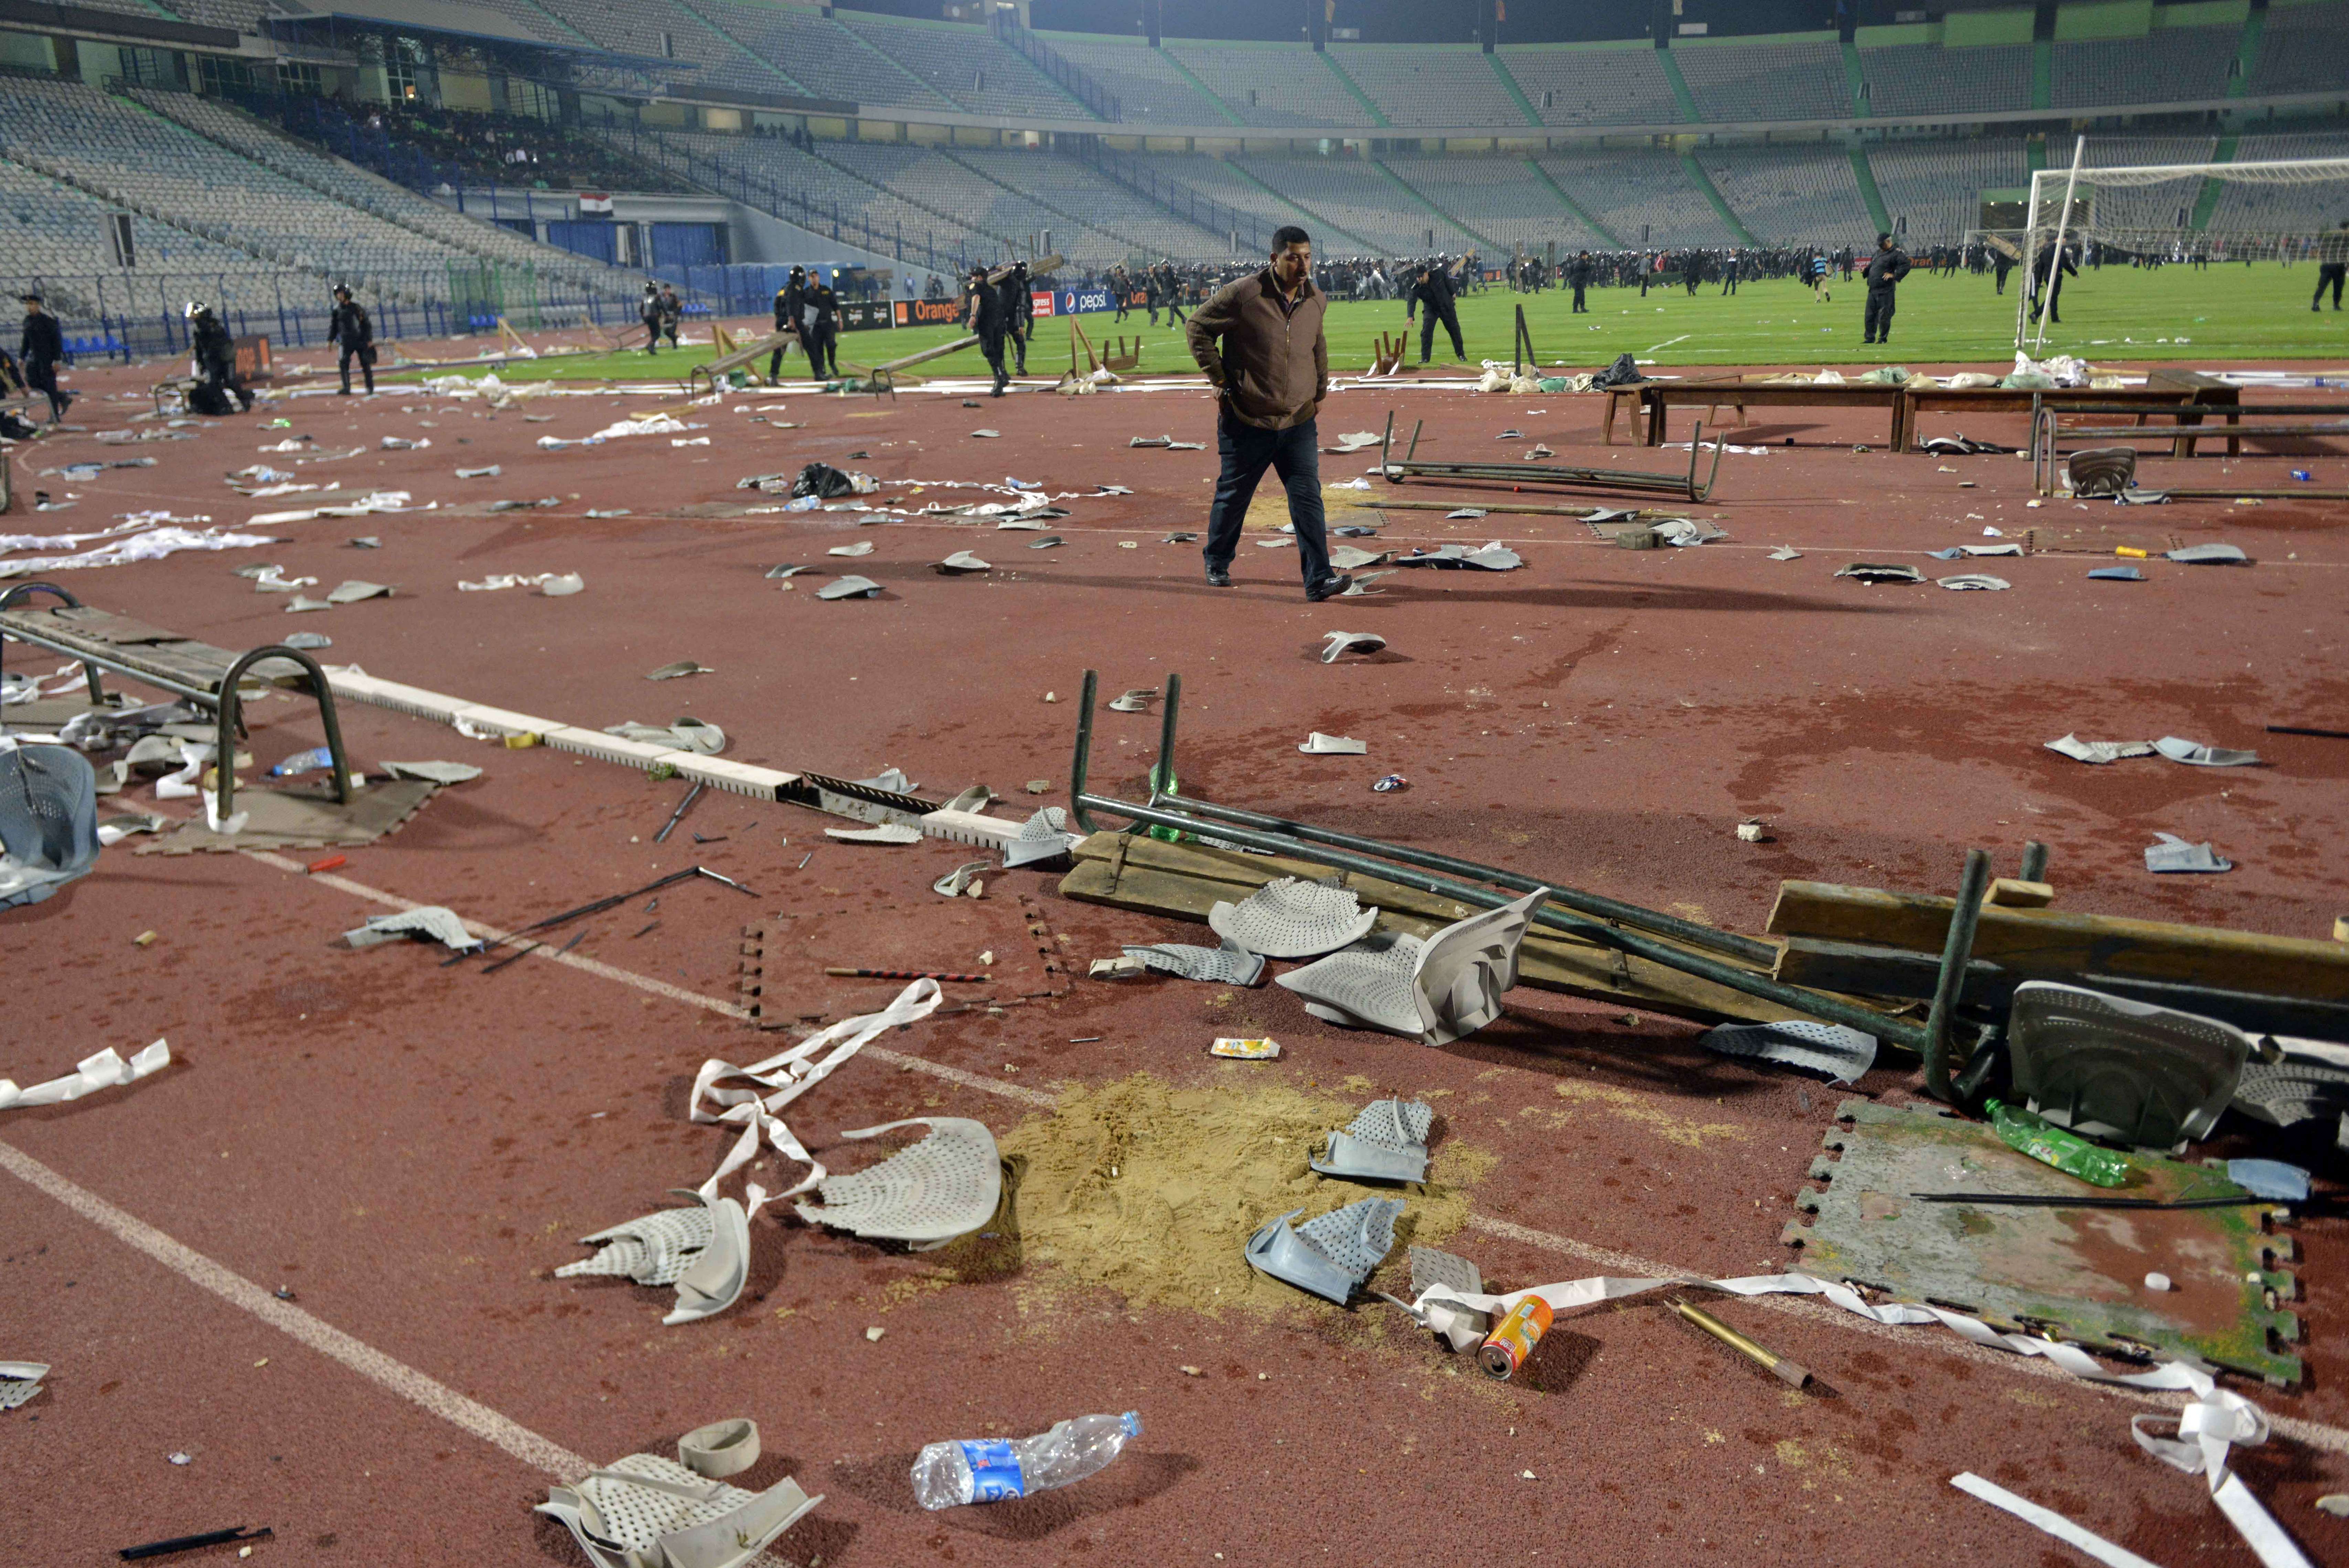 Despite triumph, Ahly fans clash with police in Cairo